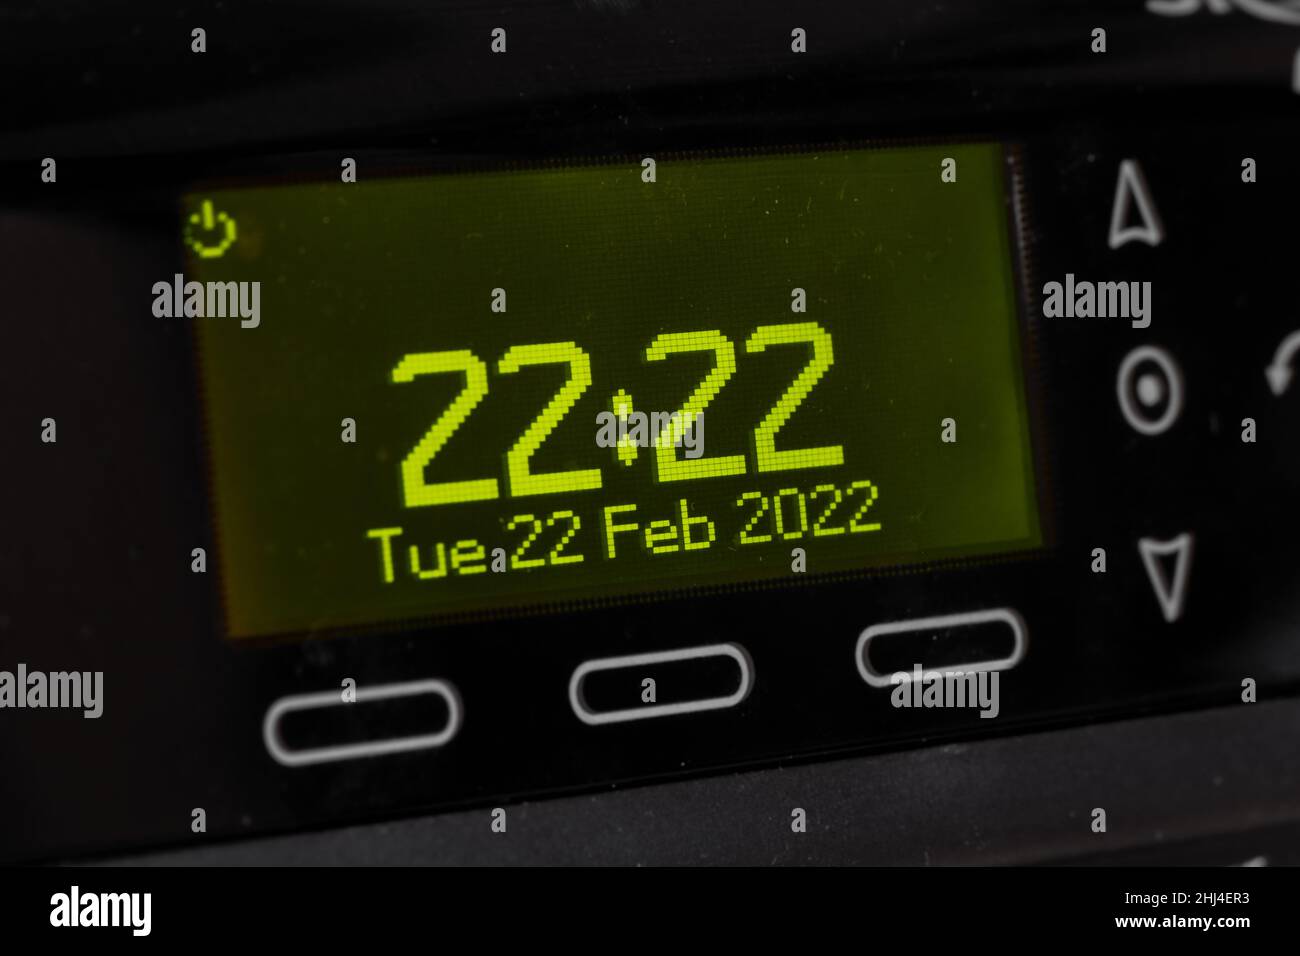 'Twosday' - February 22nd 2022 a palindrome date 22/02/2022 Stock Photo